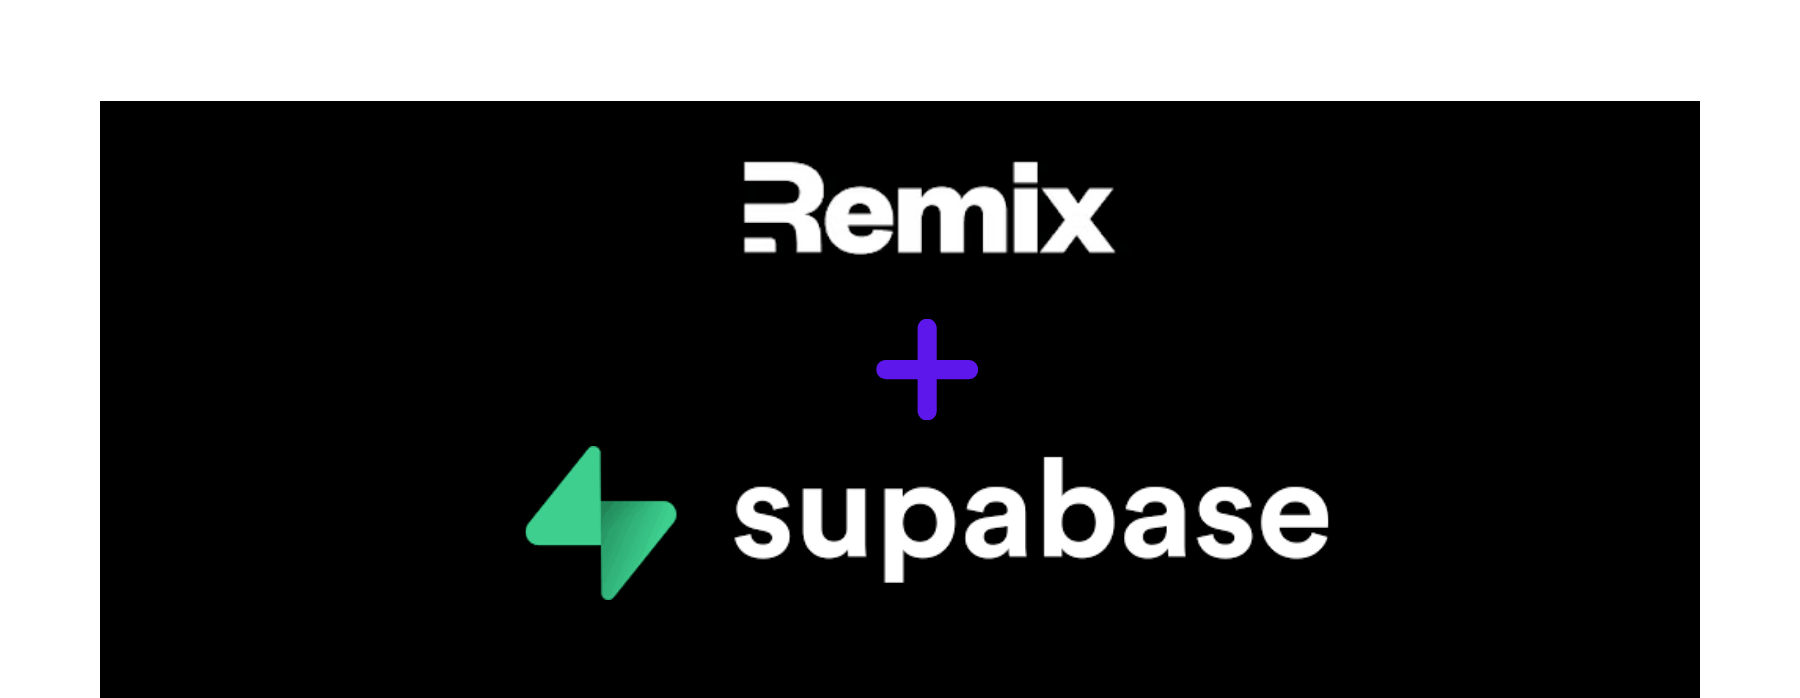 Supabase Integration with Remix for Local Development - Featured image